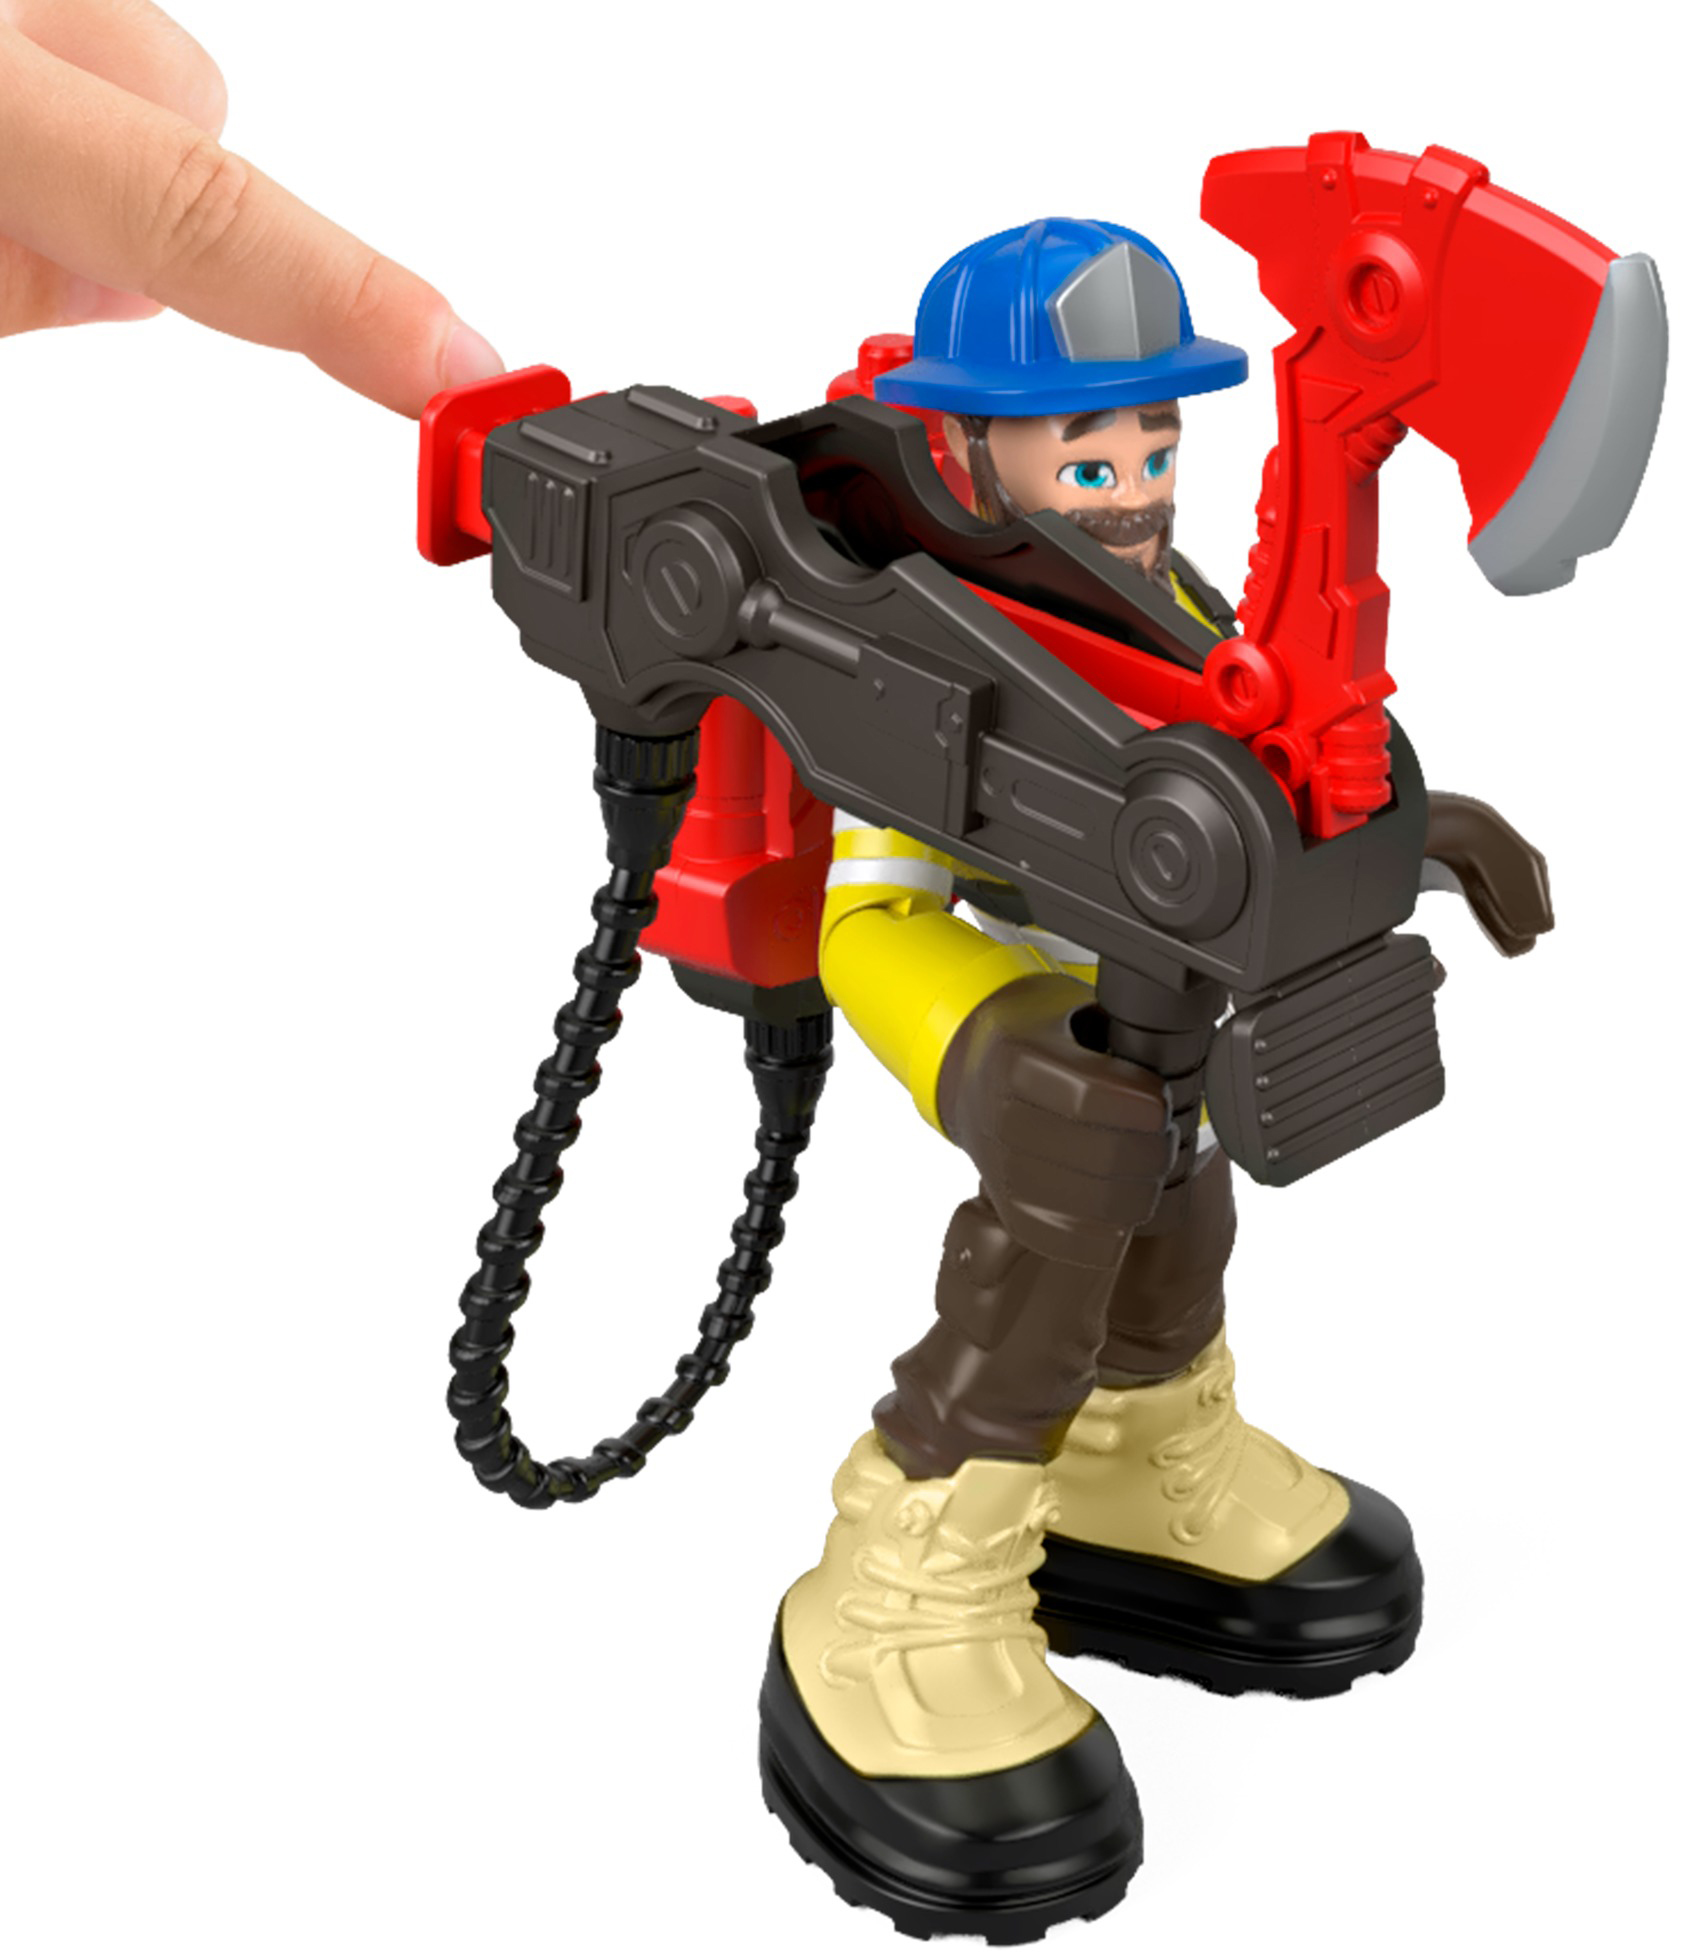 Fisher-Price Rescue Heroes Forrest Fuego Firefighter Figure Set - image 4 of 7